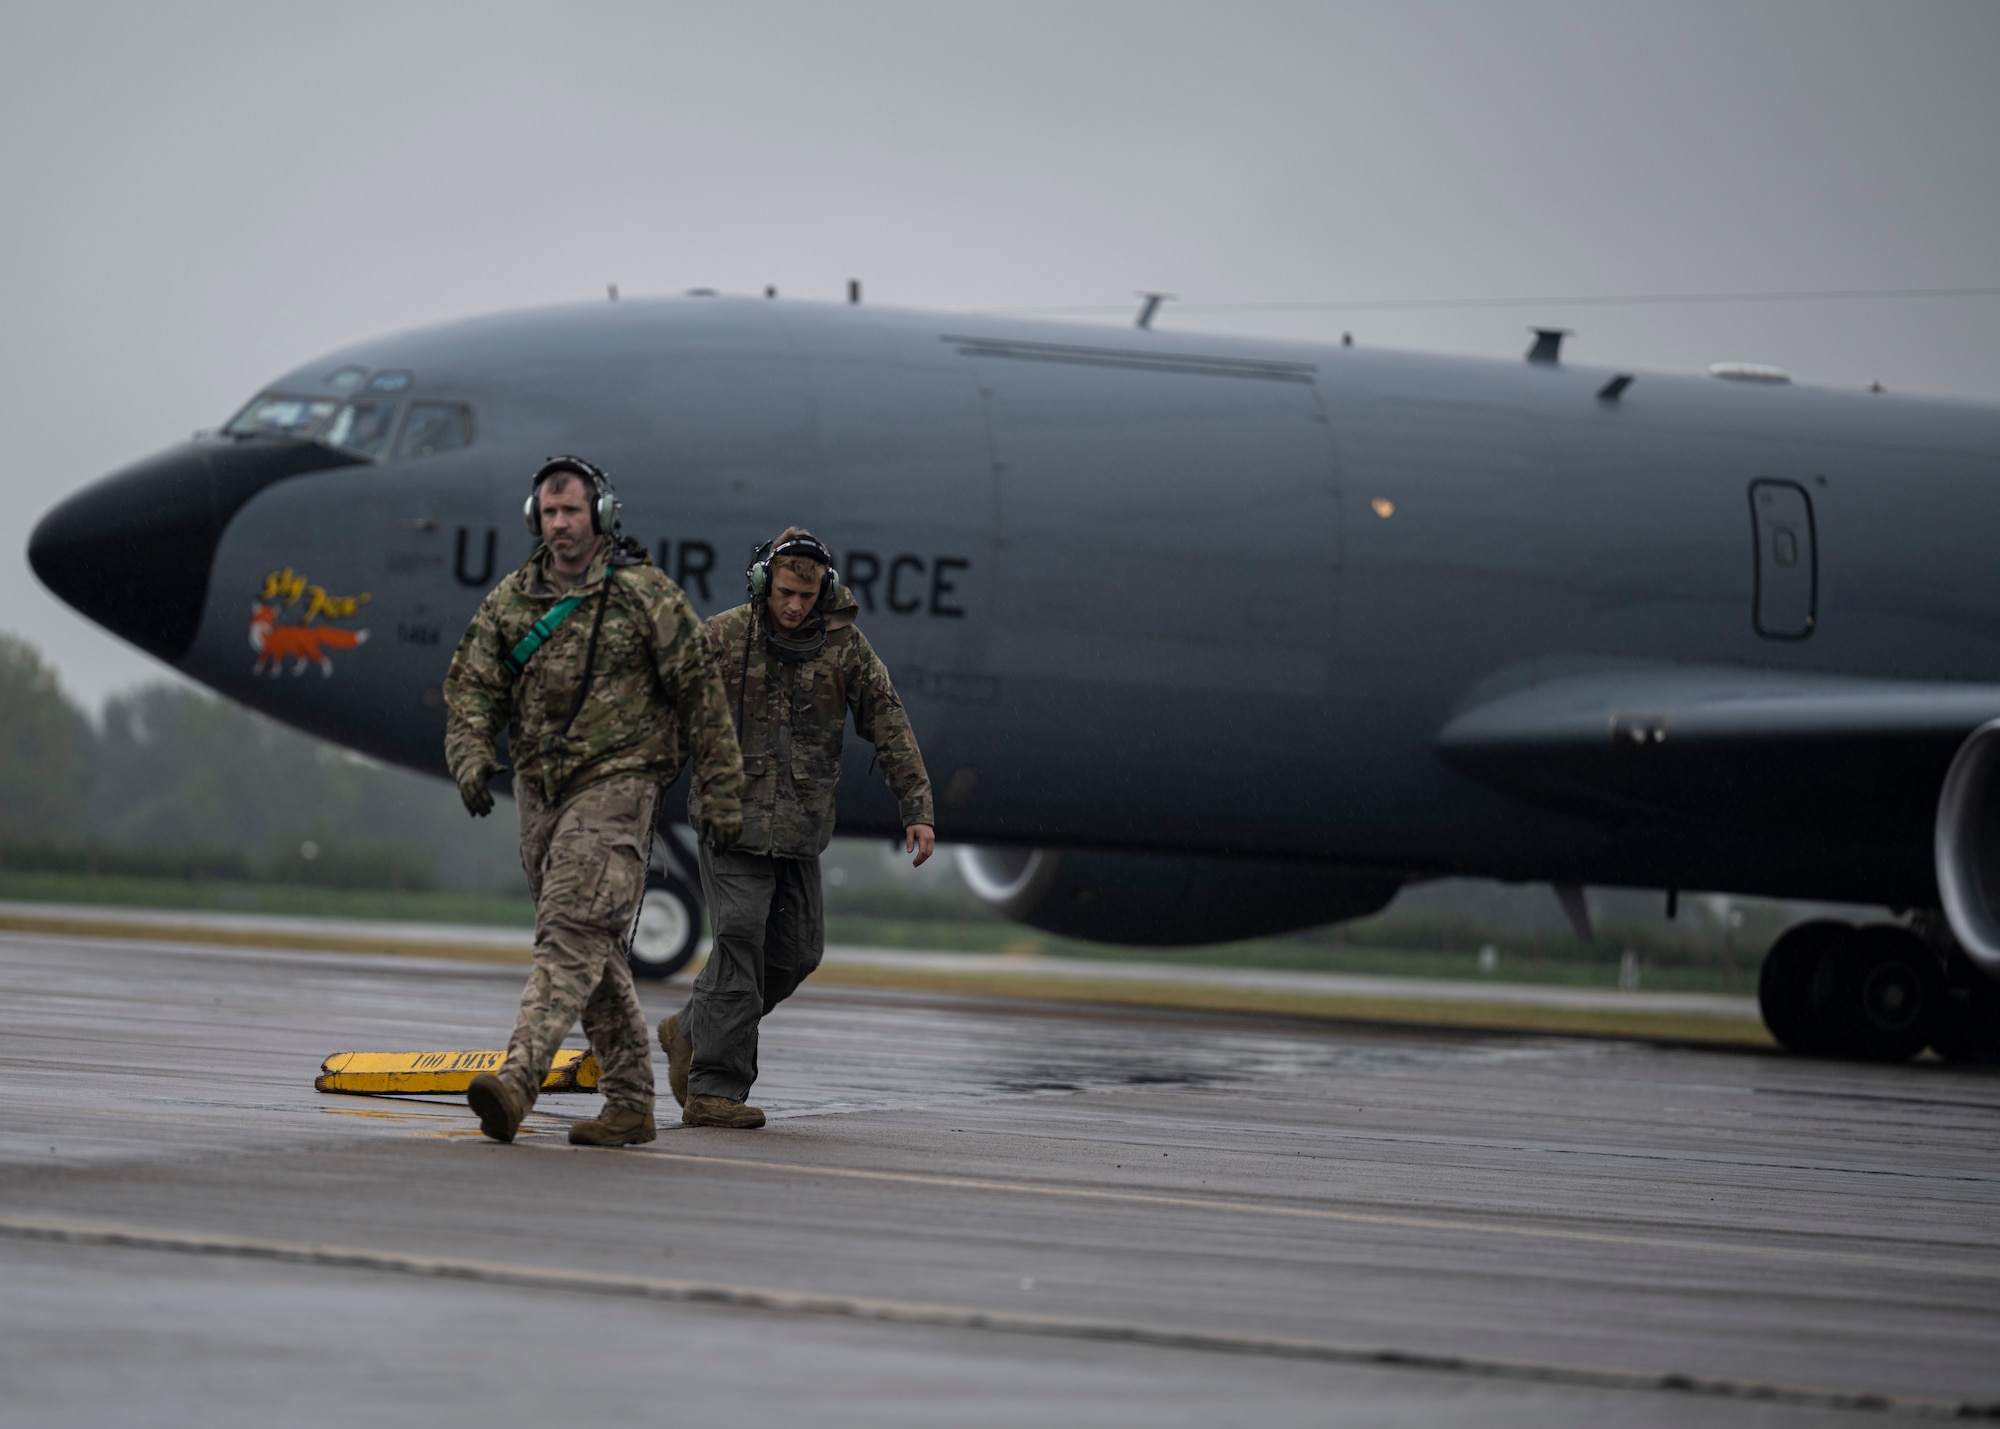 U.S. Air Force Airmen assigned to the 100th Air Refueling Wing, Royal Air Force Mildenhall, England, prepare to launch a KC-135 Stratotanker aircraft during exercise High Life at RAF Fairford, England, Sept. 14, 2021.